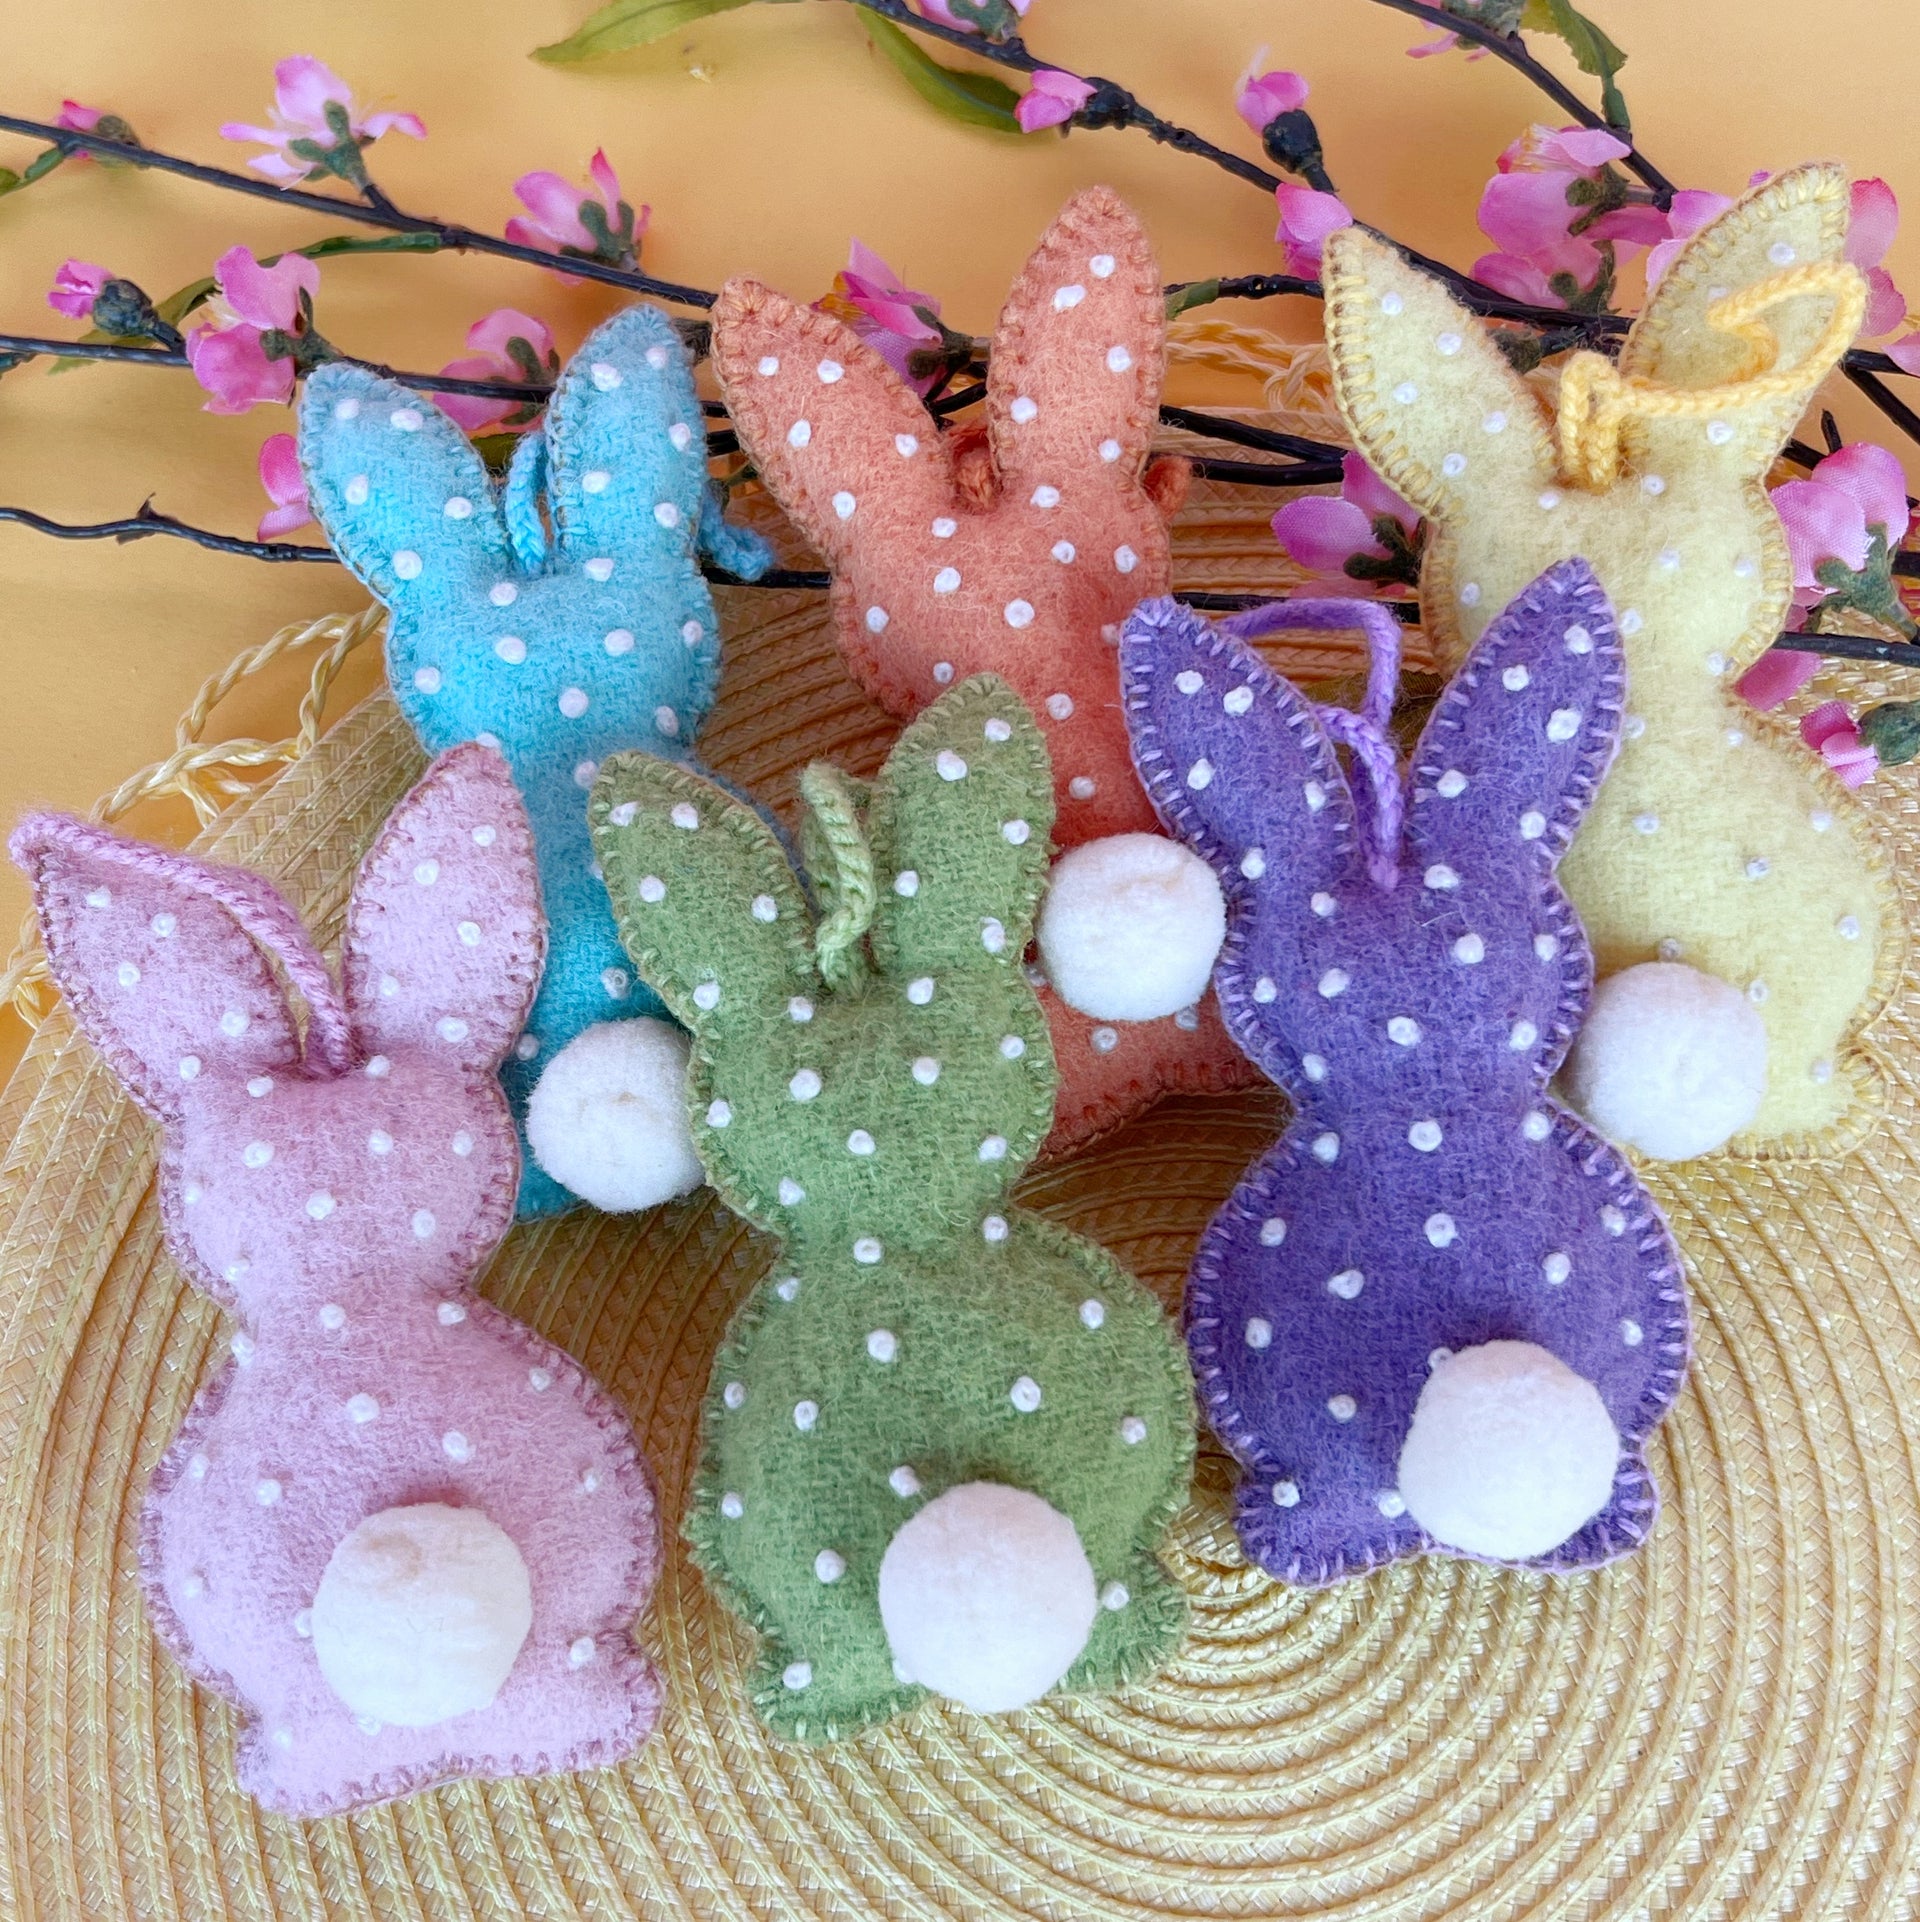 Six handmade Easter bunny Ornaments in soft pastel colors with embroidered dots.